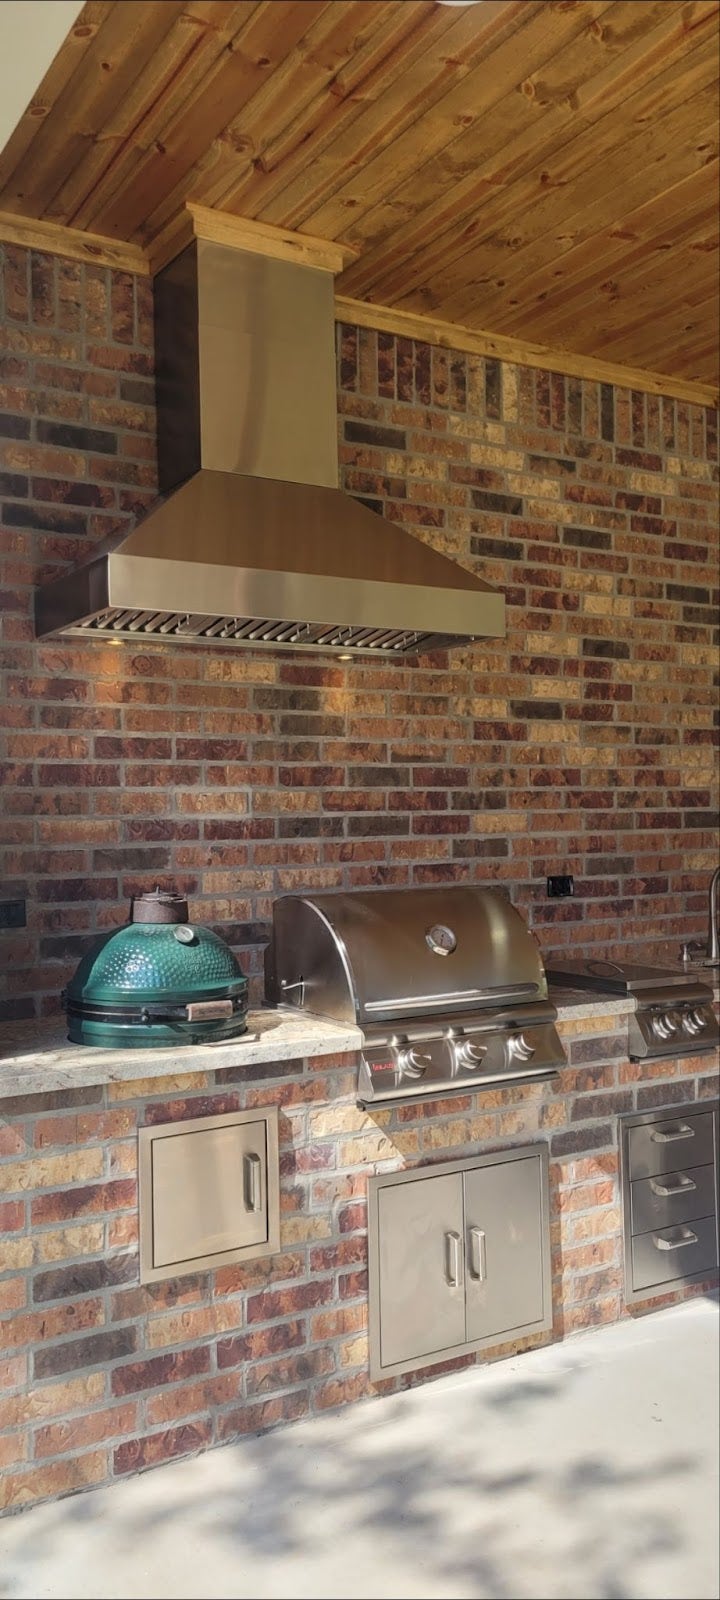 Spacious patio grilling area featuring a premium stainless steel BBQ, a Big Green Egg smoker, and a rustic brick backdrop with wooden overhead. - Proline Range Hoods - prolinerangehoods.com 